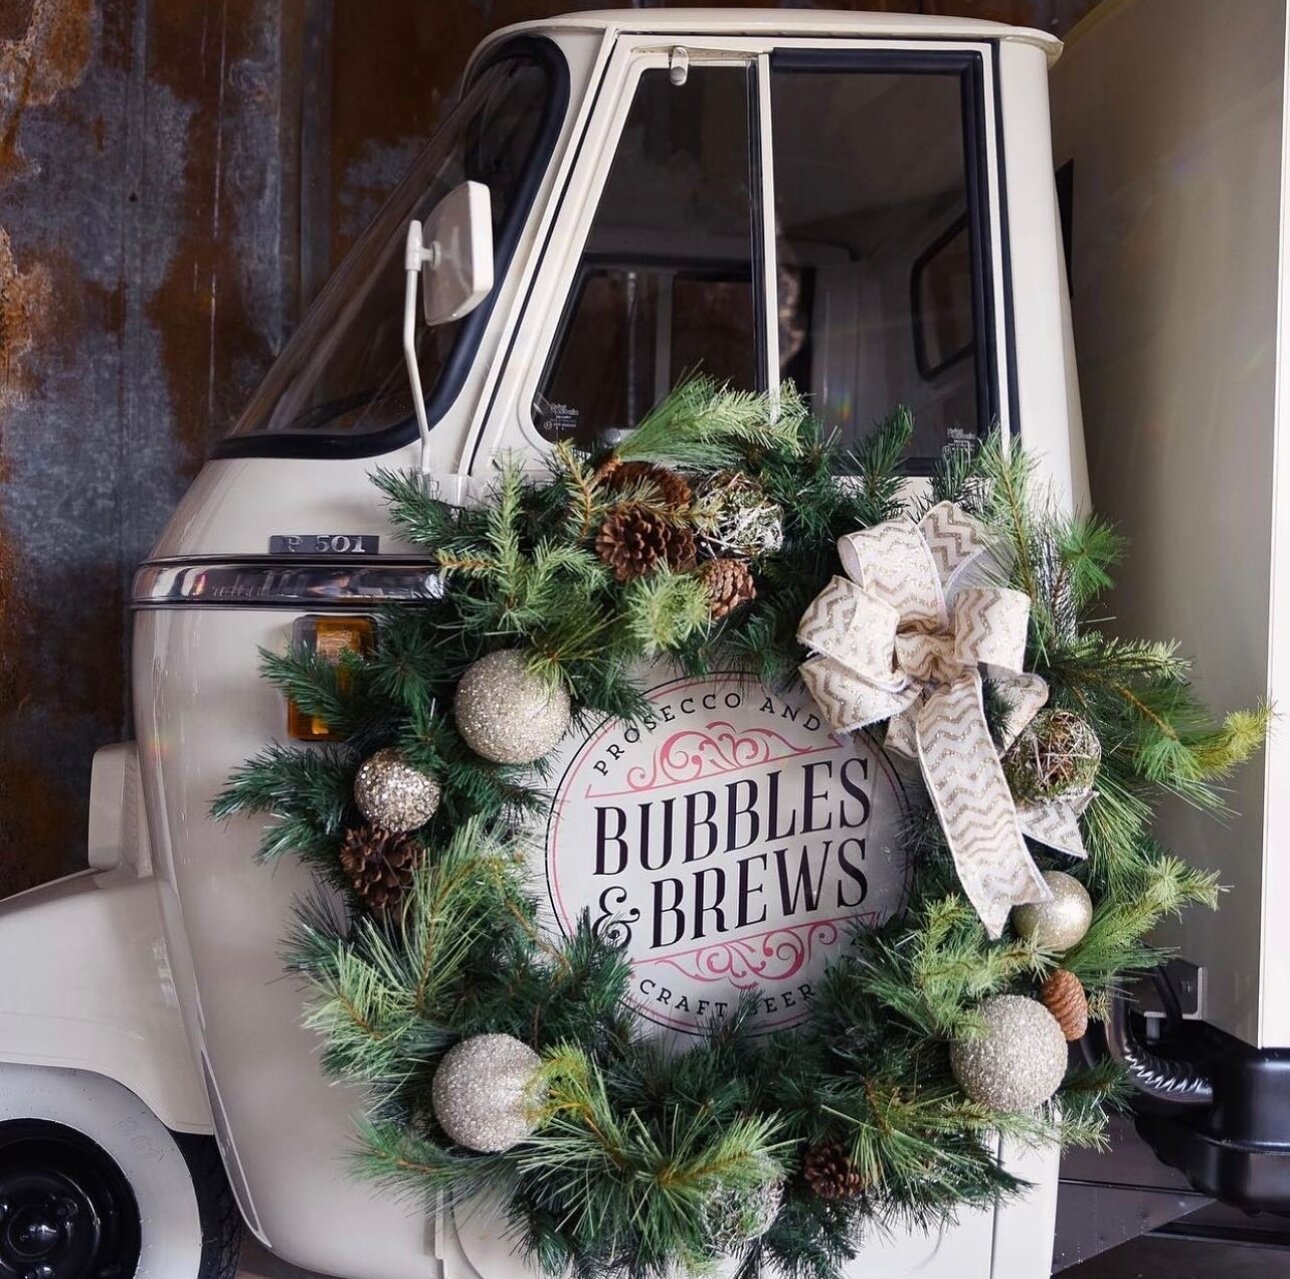 MERRY CHRISTMAS from our family to yours! 🤍🌲⁠
⁠
📷️: @laurelbellephotography⁠
◻️: @rkdesign⁠
🍾: @bubblesandbrewsclt⁠
⁠
// #ChristmasInspo Piaggio #ChicagoMobileBar #ChicagoChristmas #BubblesAndBrews #EventPlanning #Bubbly #Brews #Champagne #Custom